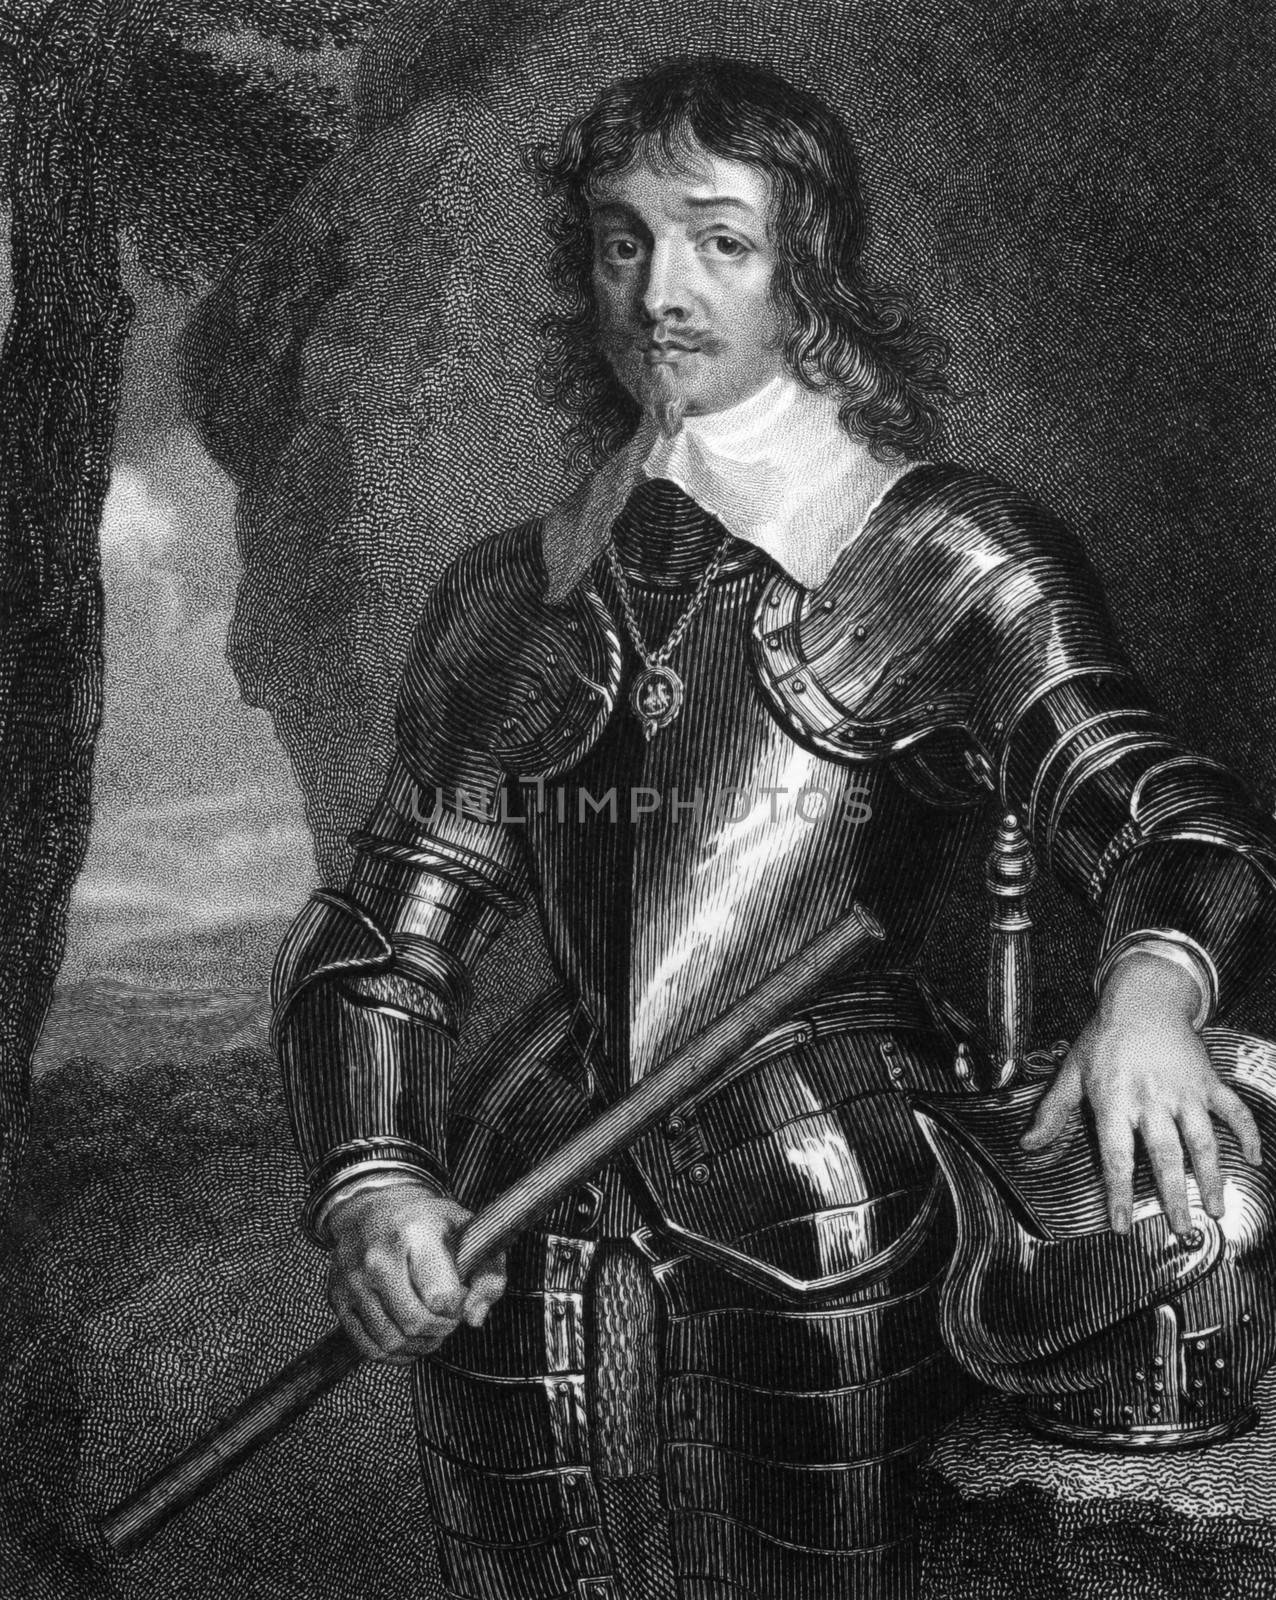 James Hamilton, 1st Duke of Hamilton (1606-1649) on engraving from 1829. Scottish nobleman and influential political and military leader during the Wars of the Three Kingdoms.Engraved by W.Finden and published in ''Portraits of Illustrious Personages of Great Britain'',UK,1829.